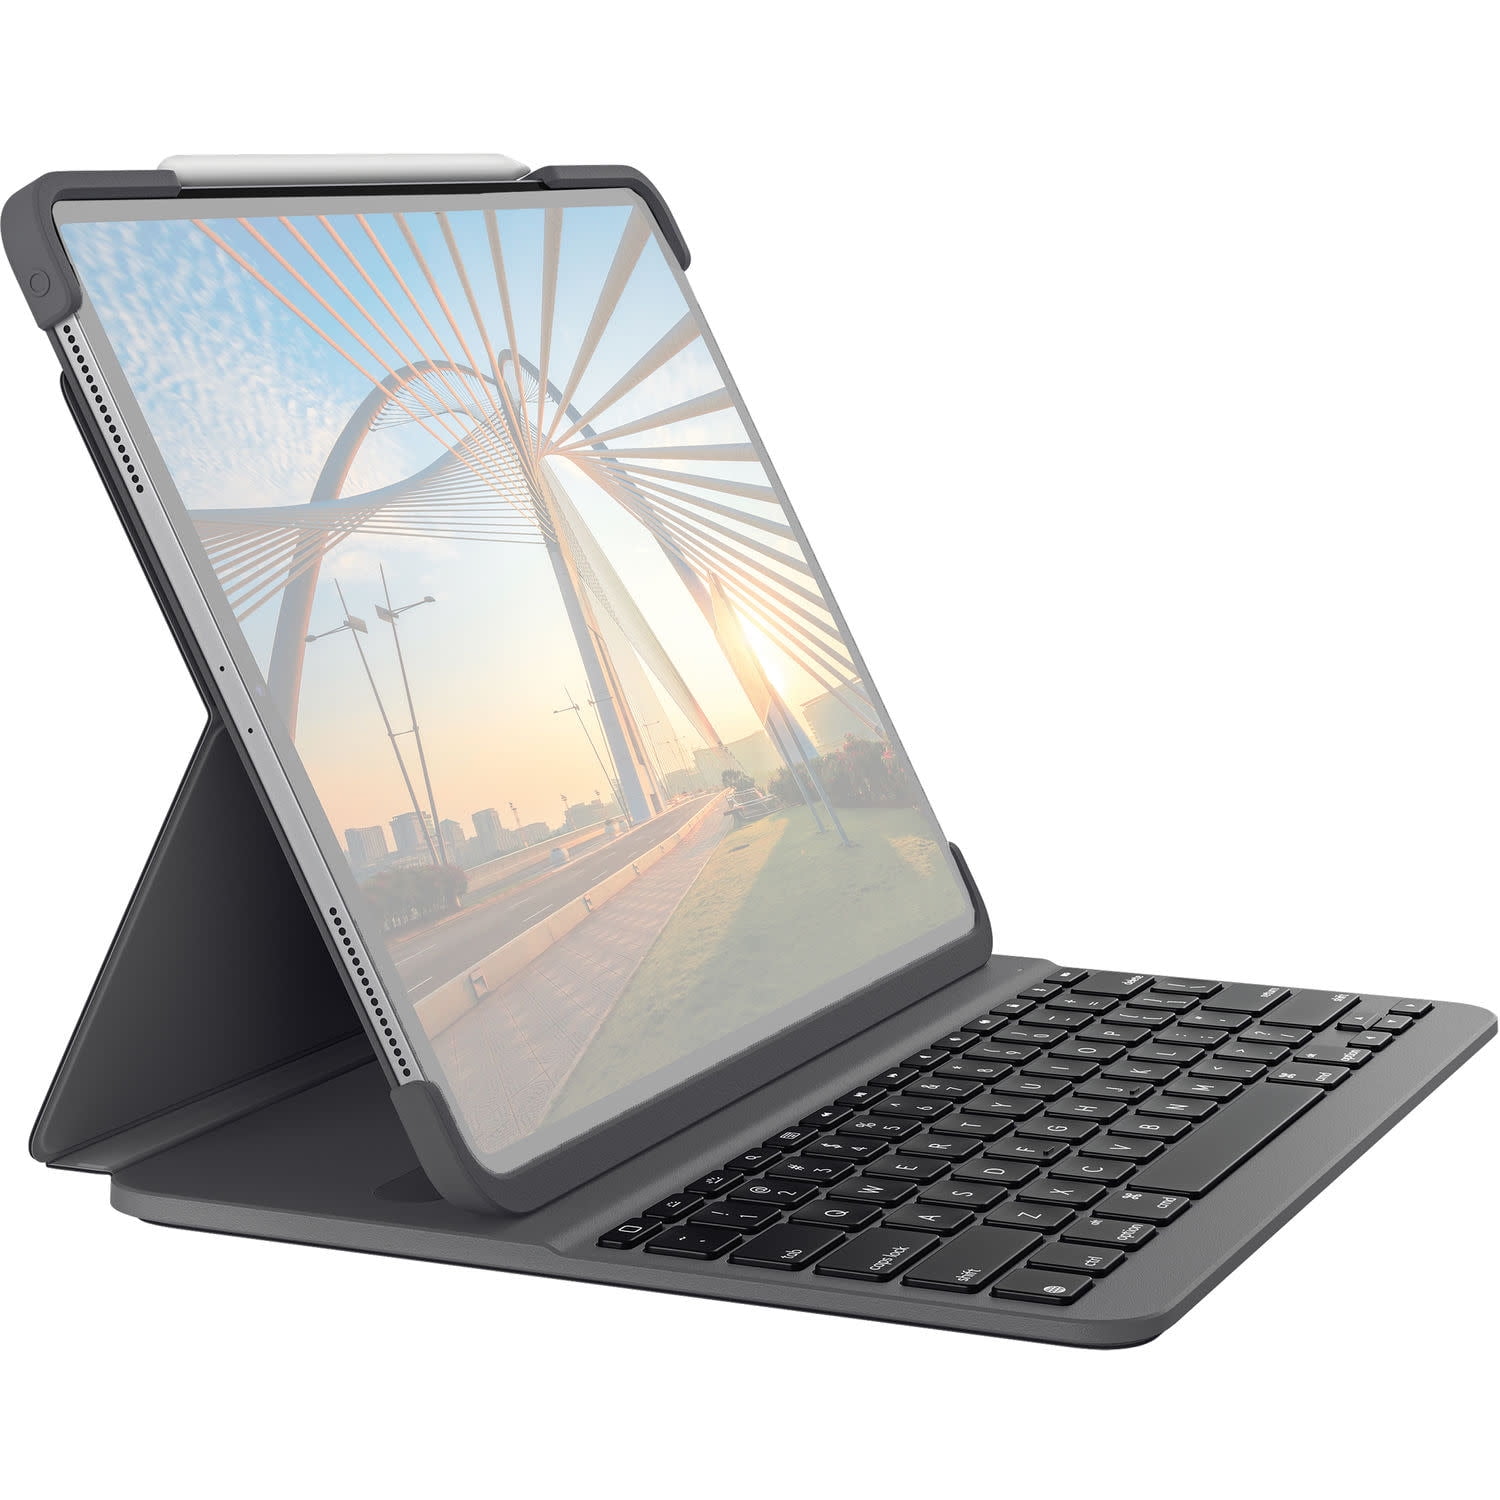 Før bitter Skjult Logitech Slim Folio Pro Backlit Bluetooth Keyboard Case for iPad Pro 11-inch  (1st, 2nd and 3rd gen) and 12.9-inch (3rd and 4th gen), Graphite -  Walmart.com